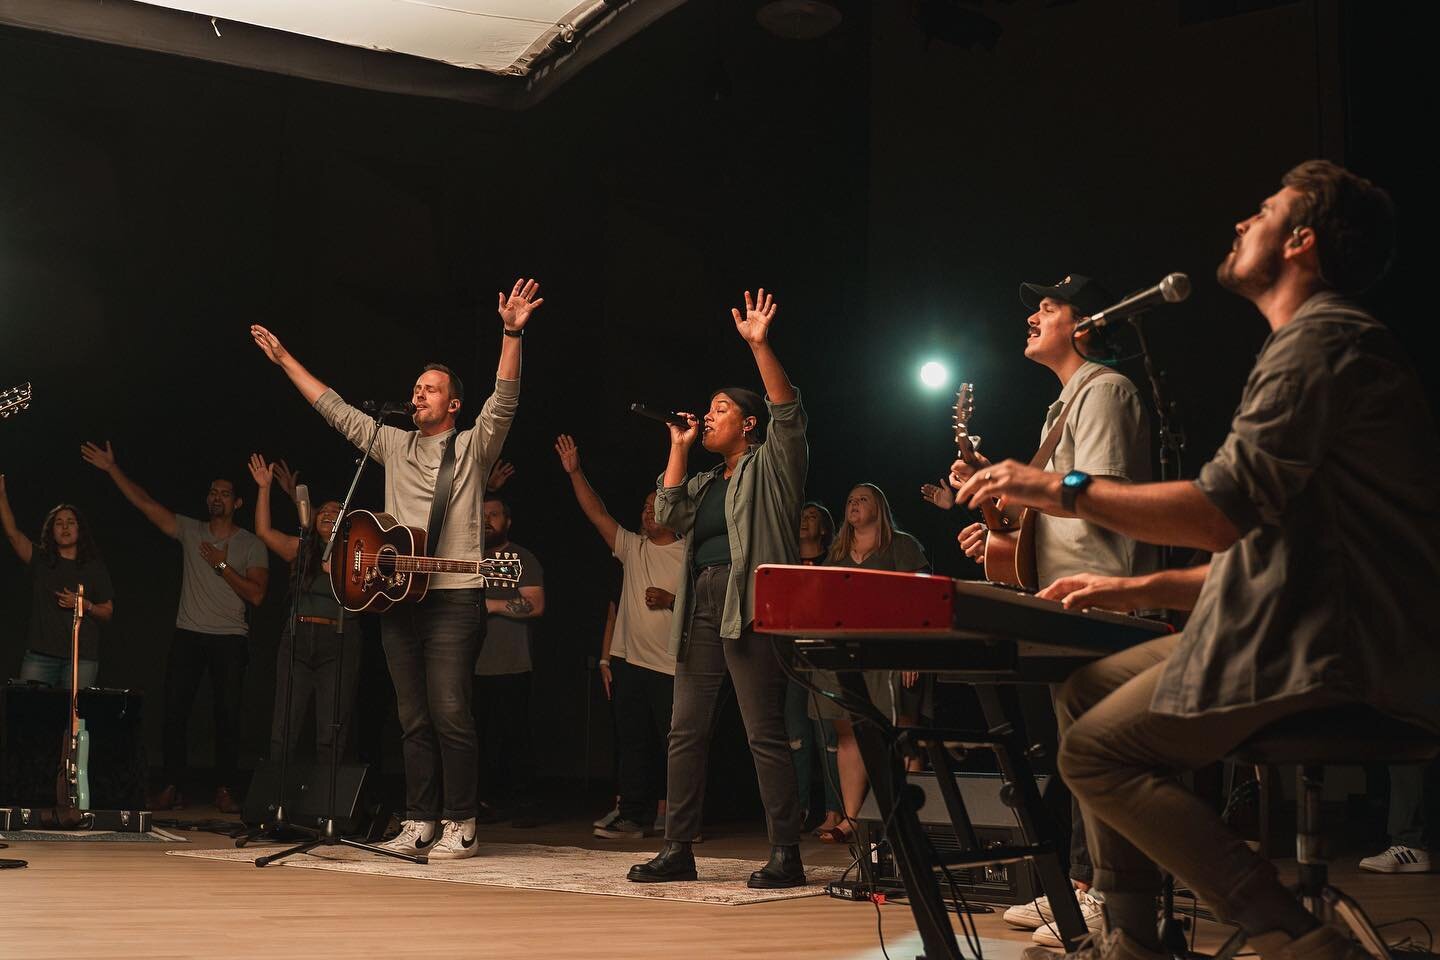 LESS OF ME &amp; MORE OF YOU

This song has been a staple on Sundays at our church over the last year or so, and one that our people have seemed to instantly connect with. In all honesty, this song is one that my congregation @north_austinstone asks 